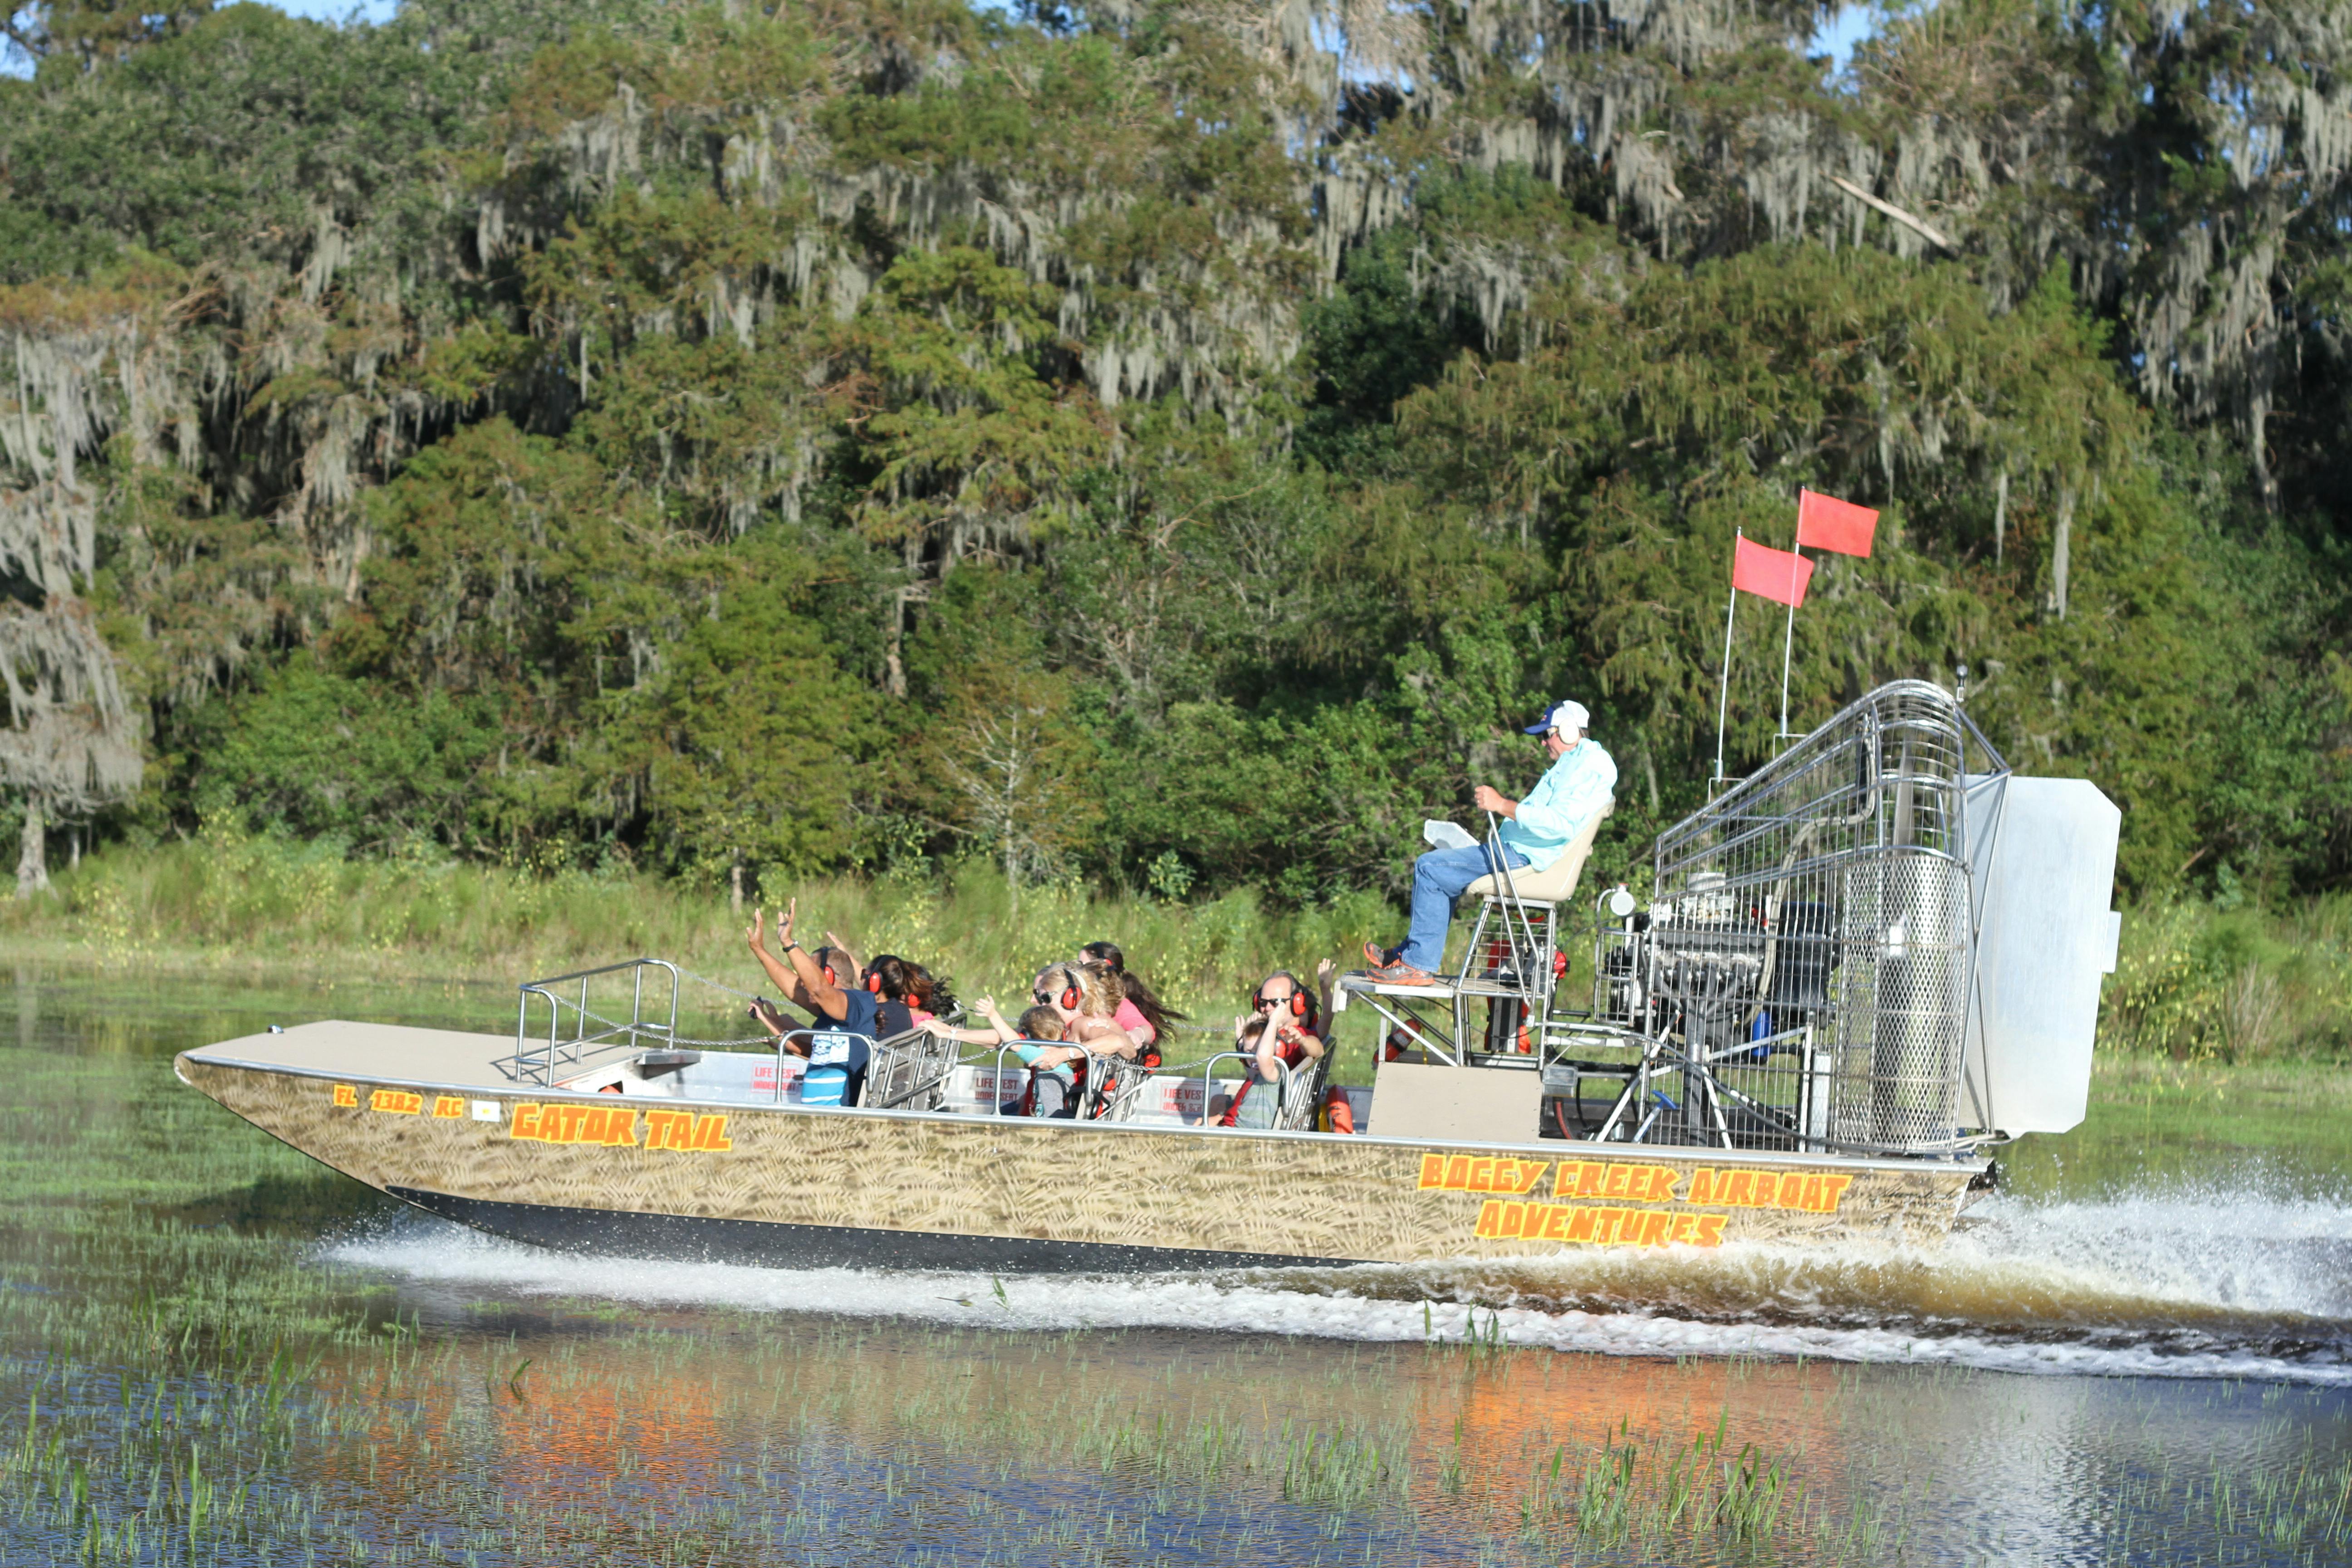 Private one hour Central Florida Everglades airboat tour with park admission